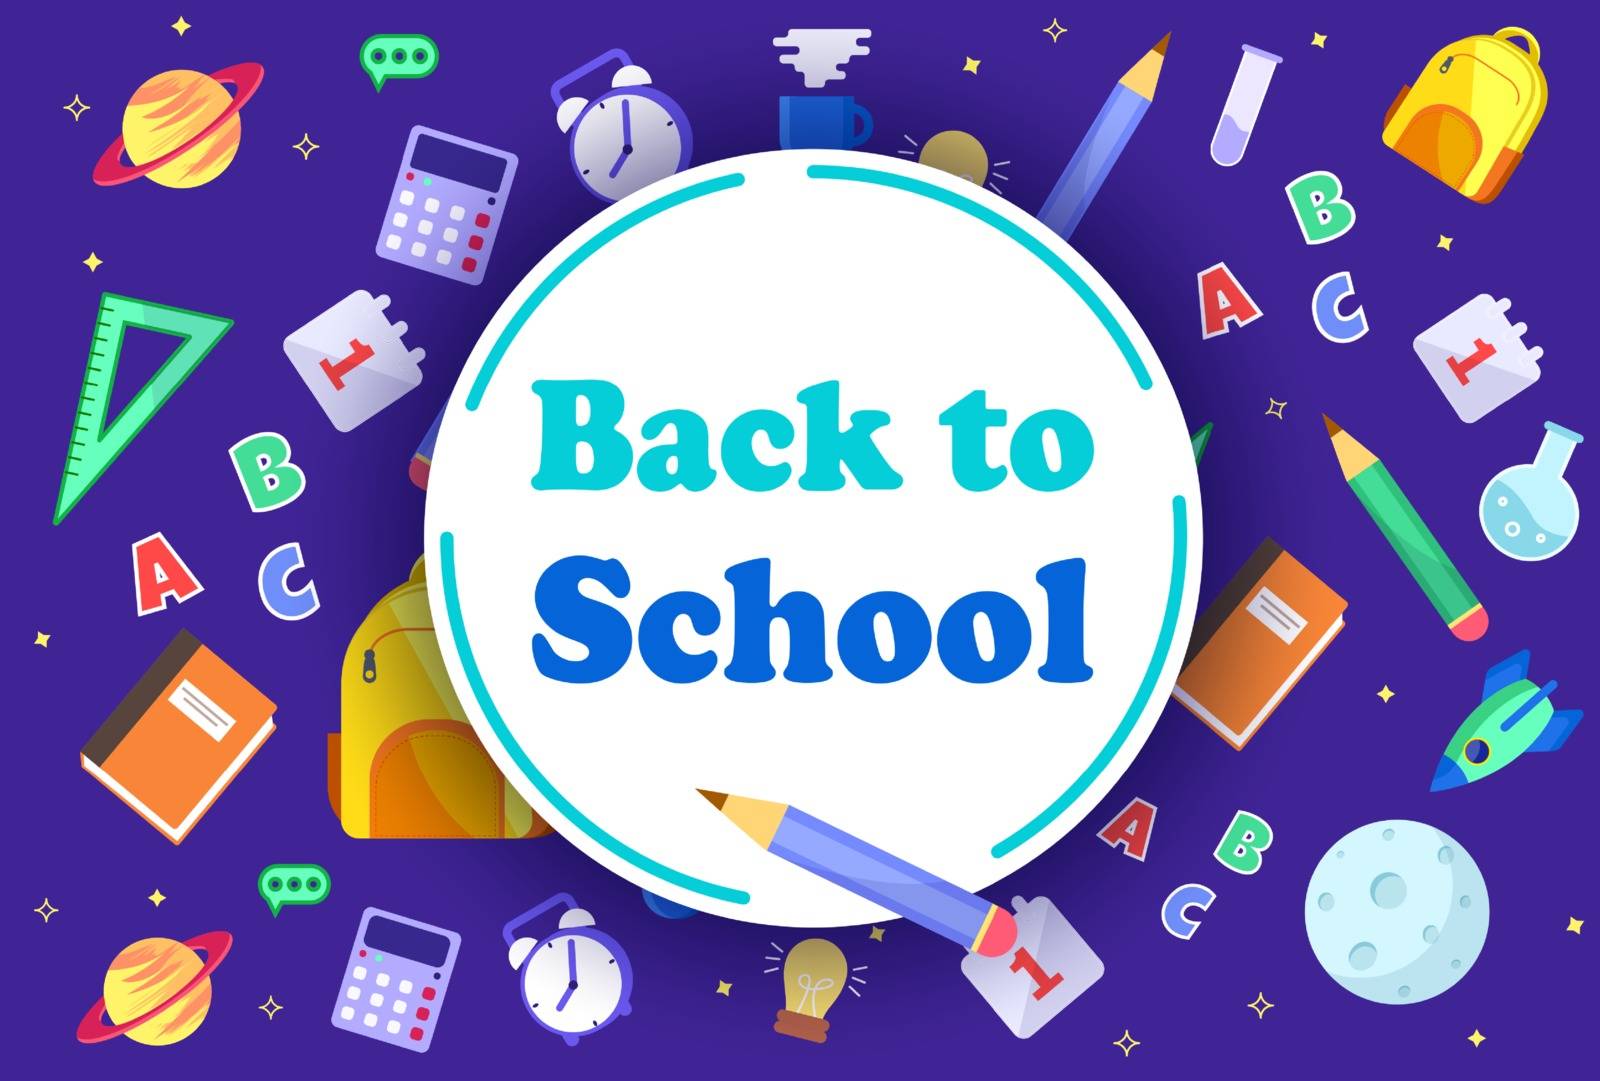 Colorful back to school templates for invitation, poster, banner, promotion,sale etc. School supplies cartoon illustration. Vector back to school design templates.